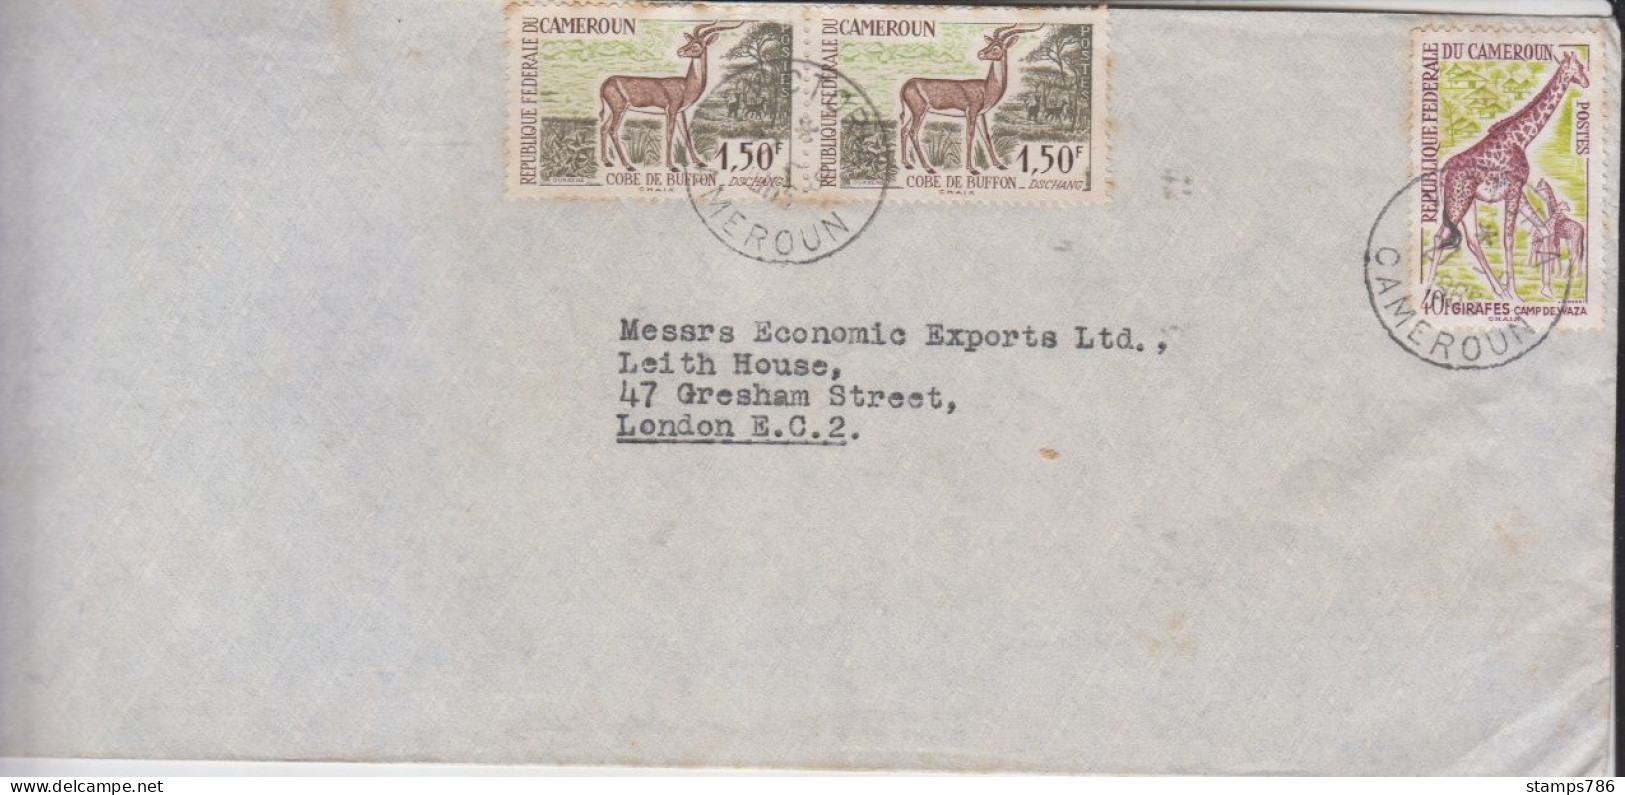 Camroon Cover Stamps {good Cover 5} - Briefe U. Dokumente